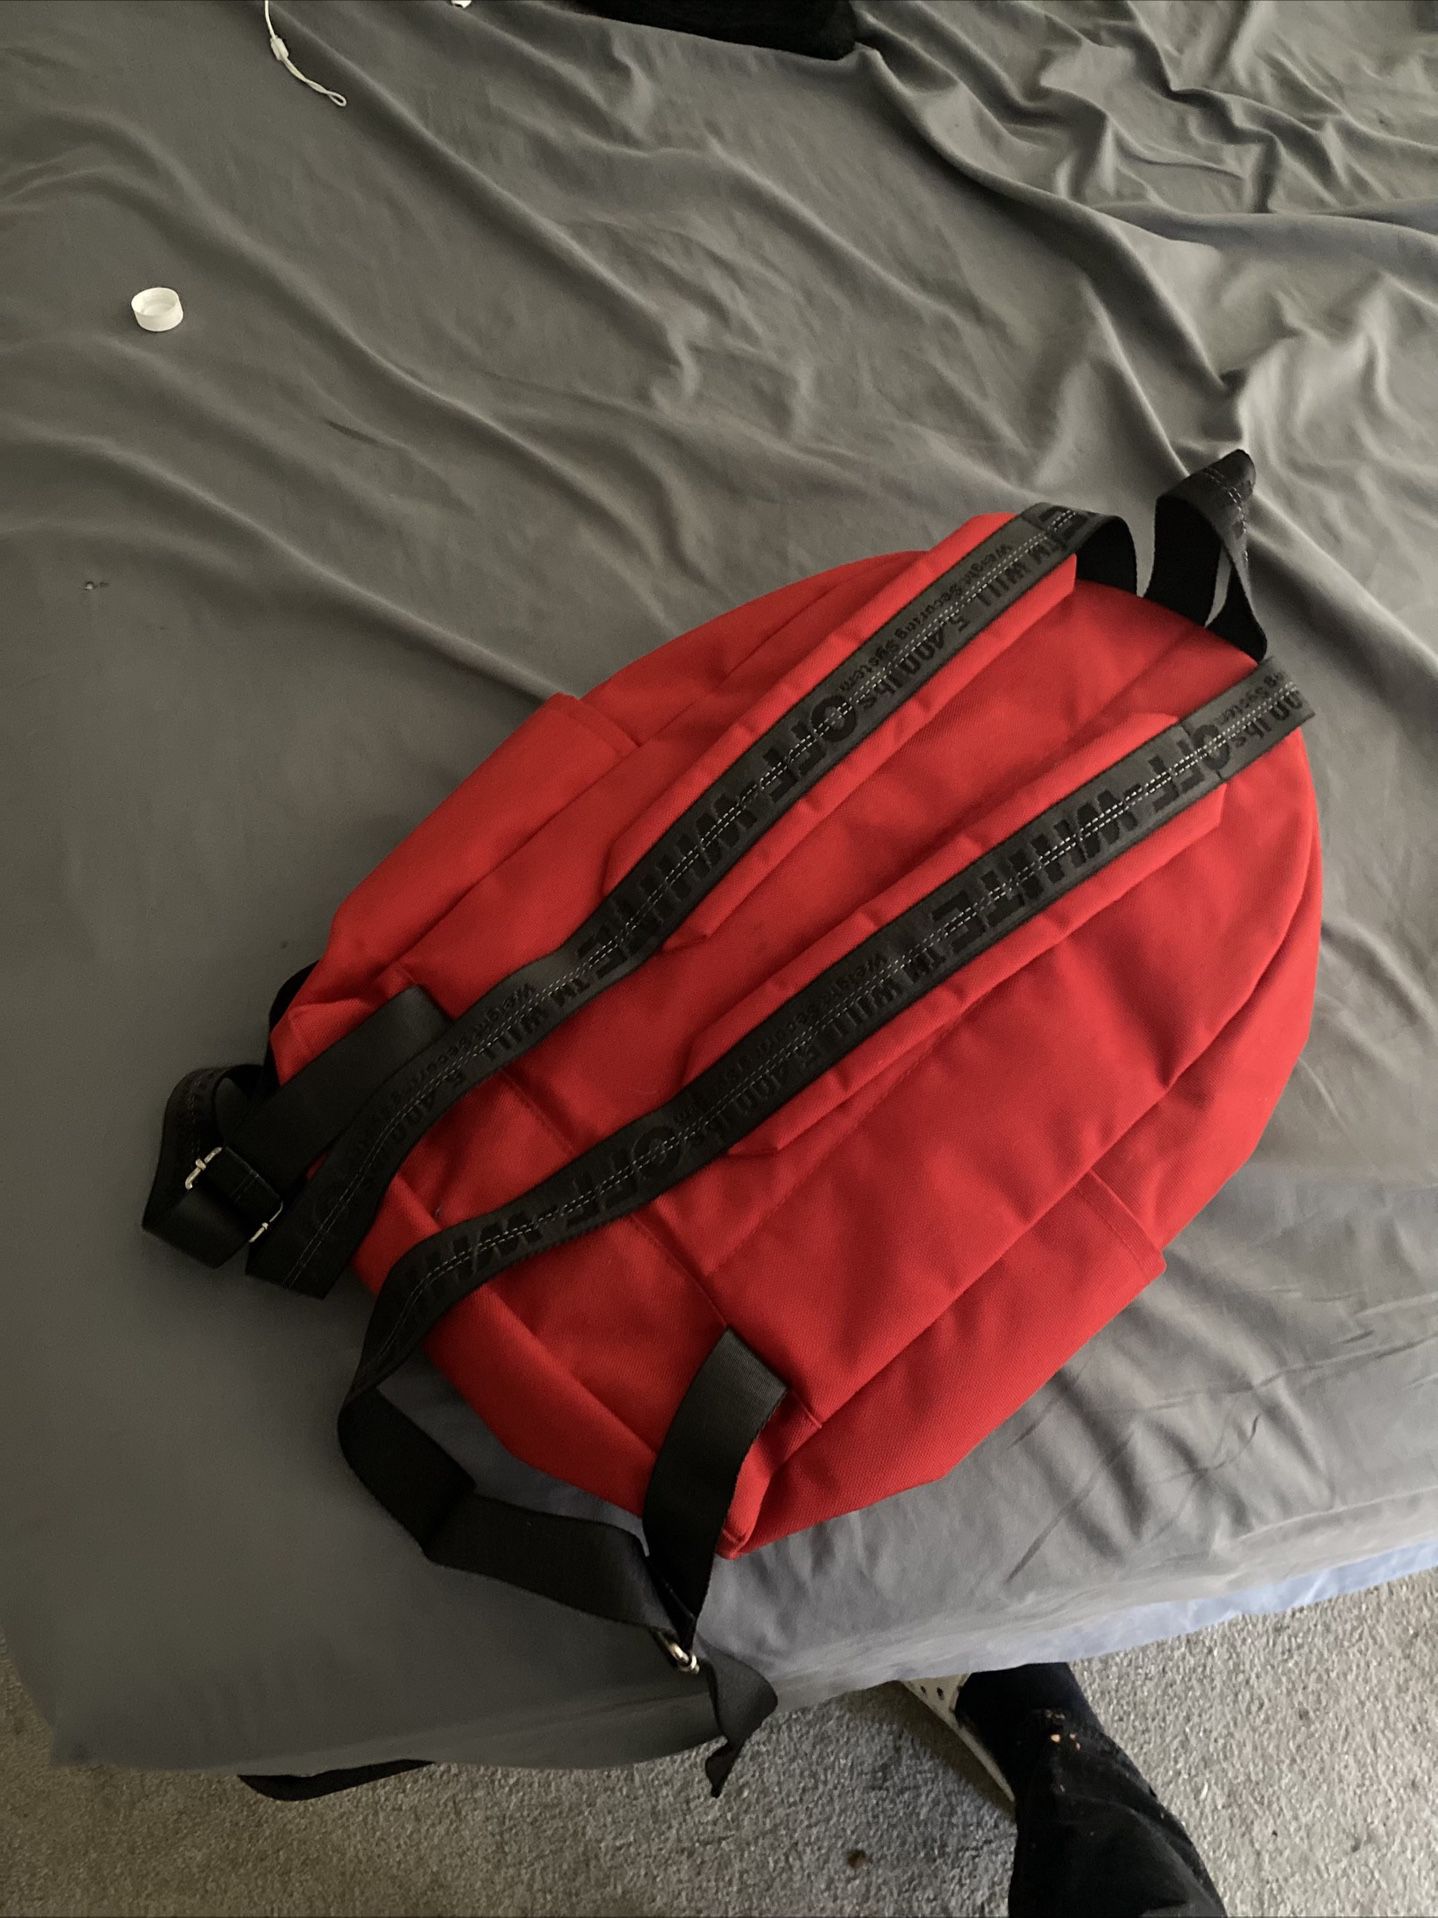 magi champion Store Off-white x Virgil Abloh backpack for Sale in Rancho Cordova, CA - OfferUp